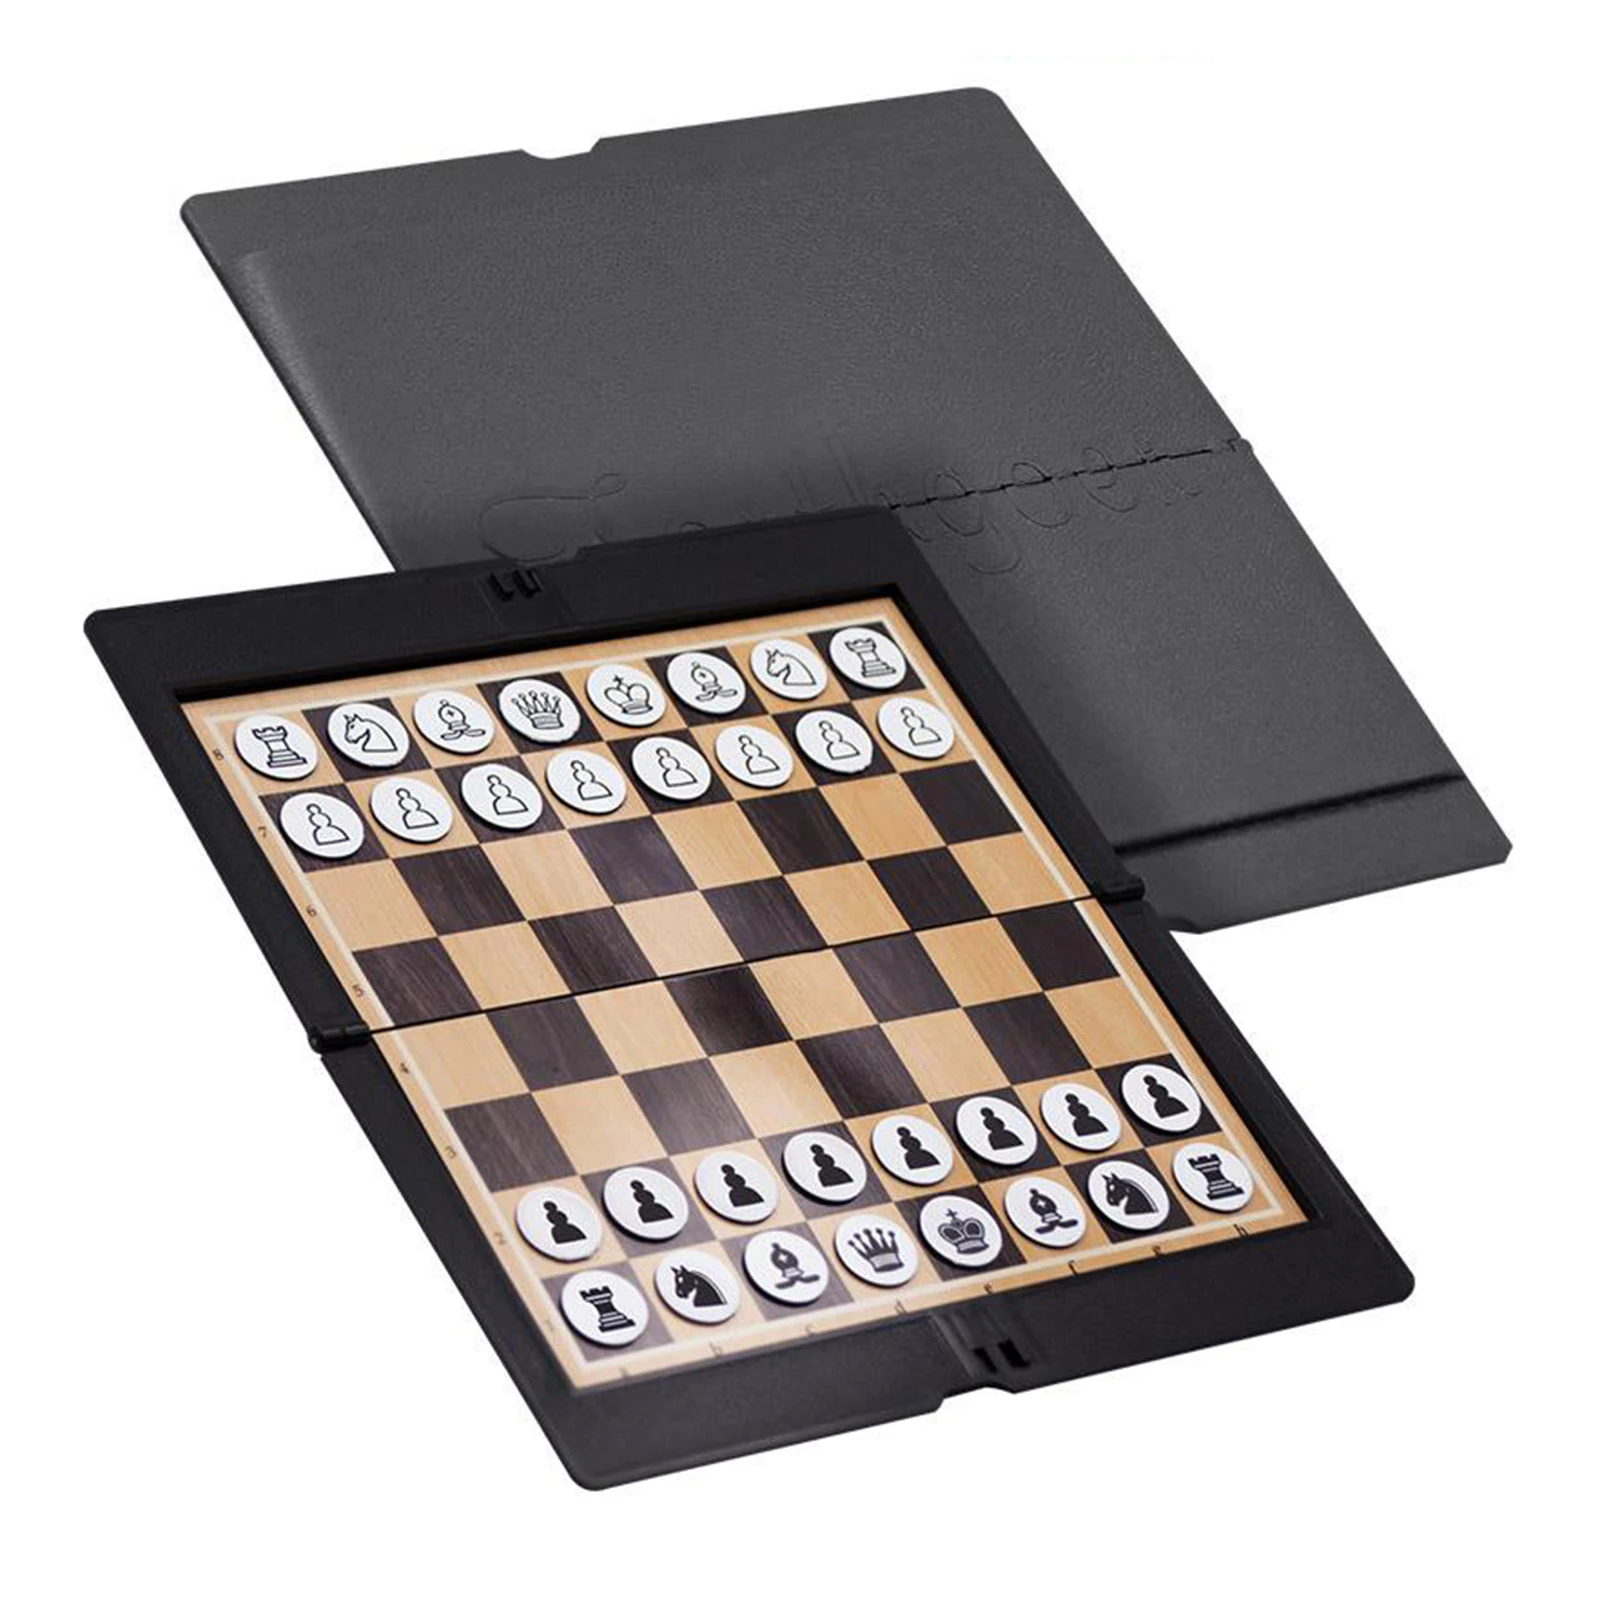 Magnetic folding chess board portable set with pieces games sport camping travel 